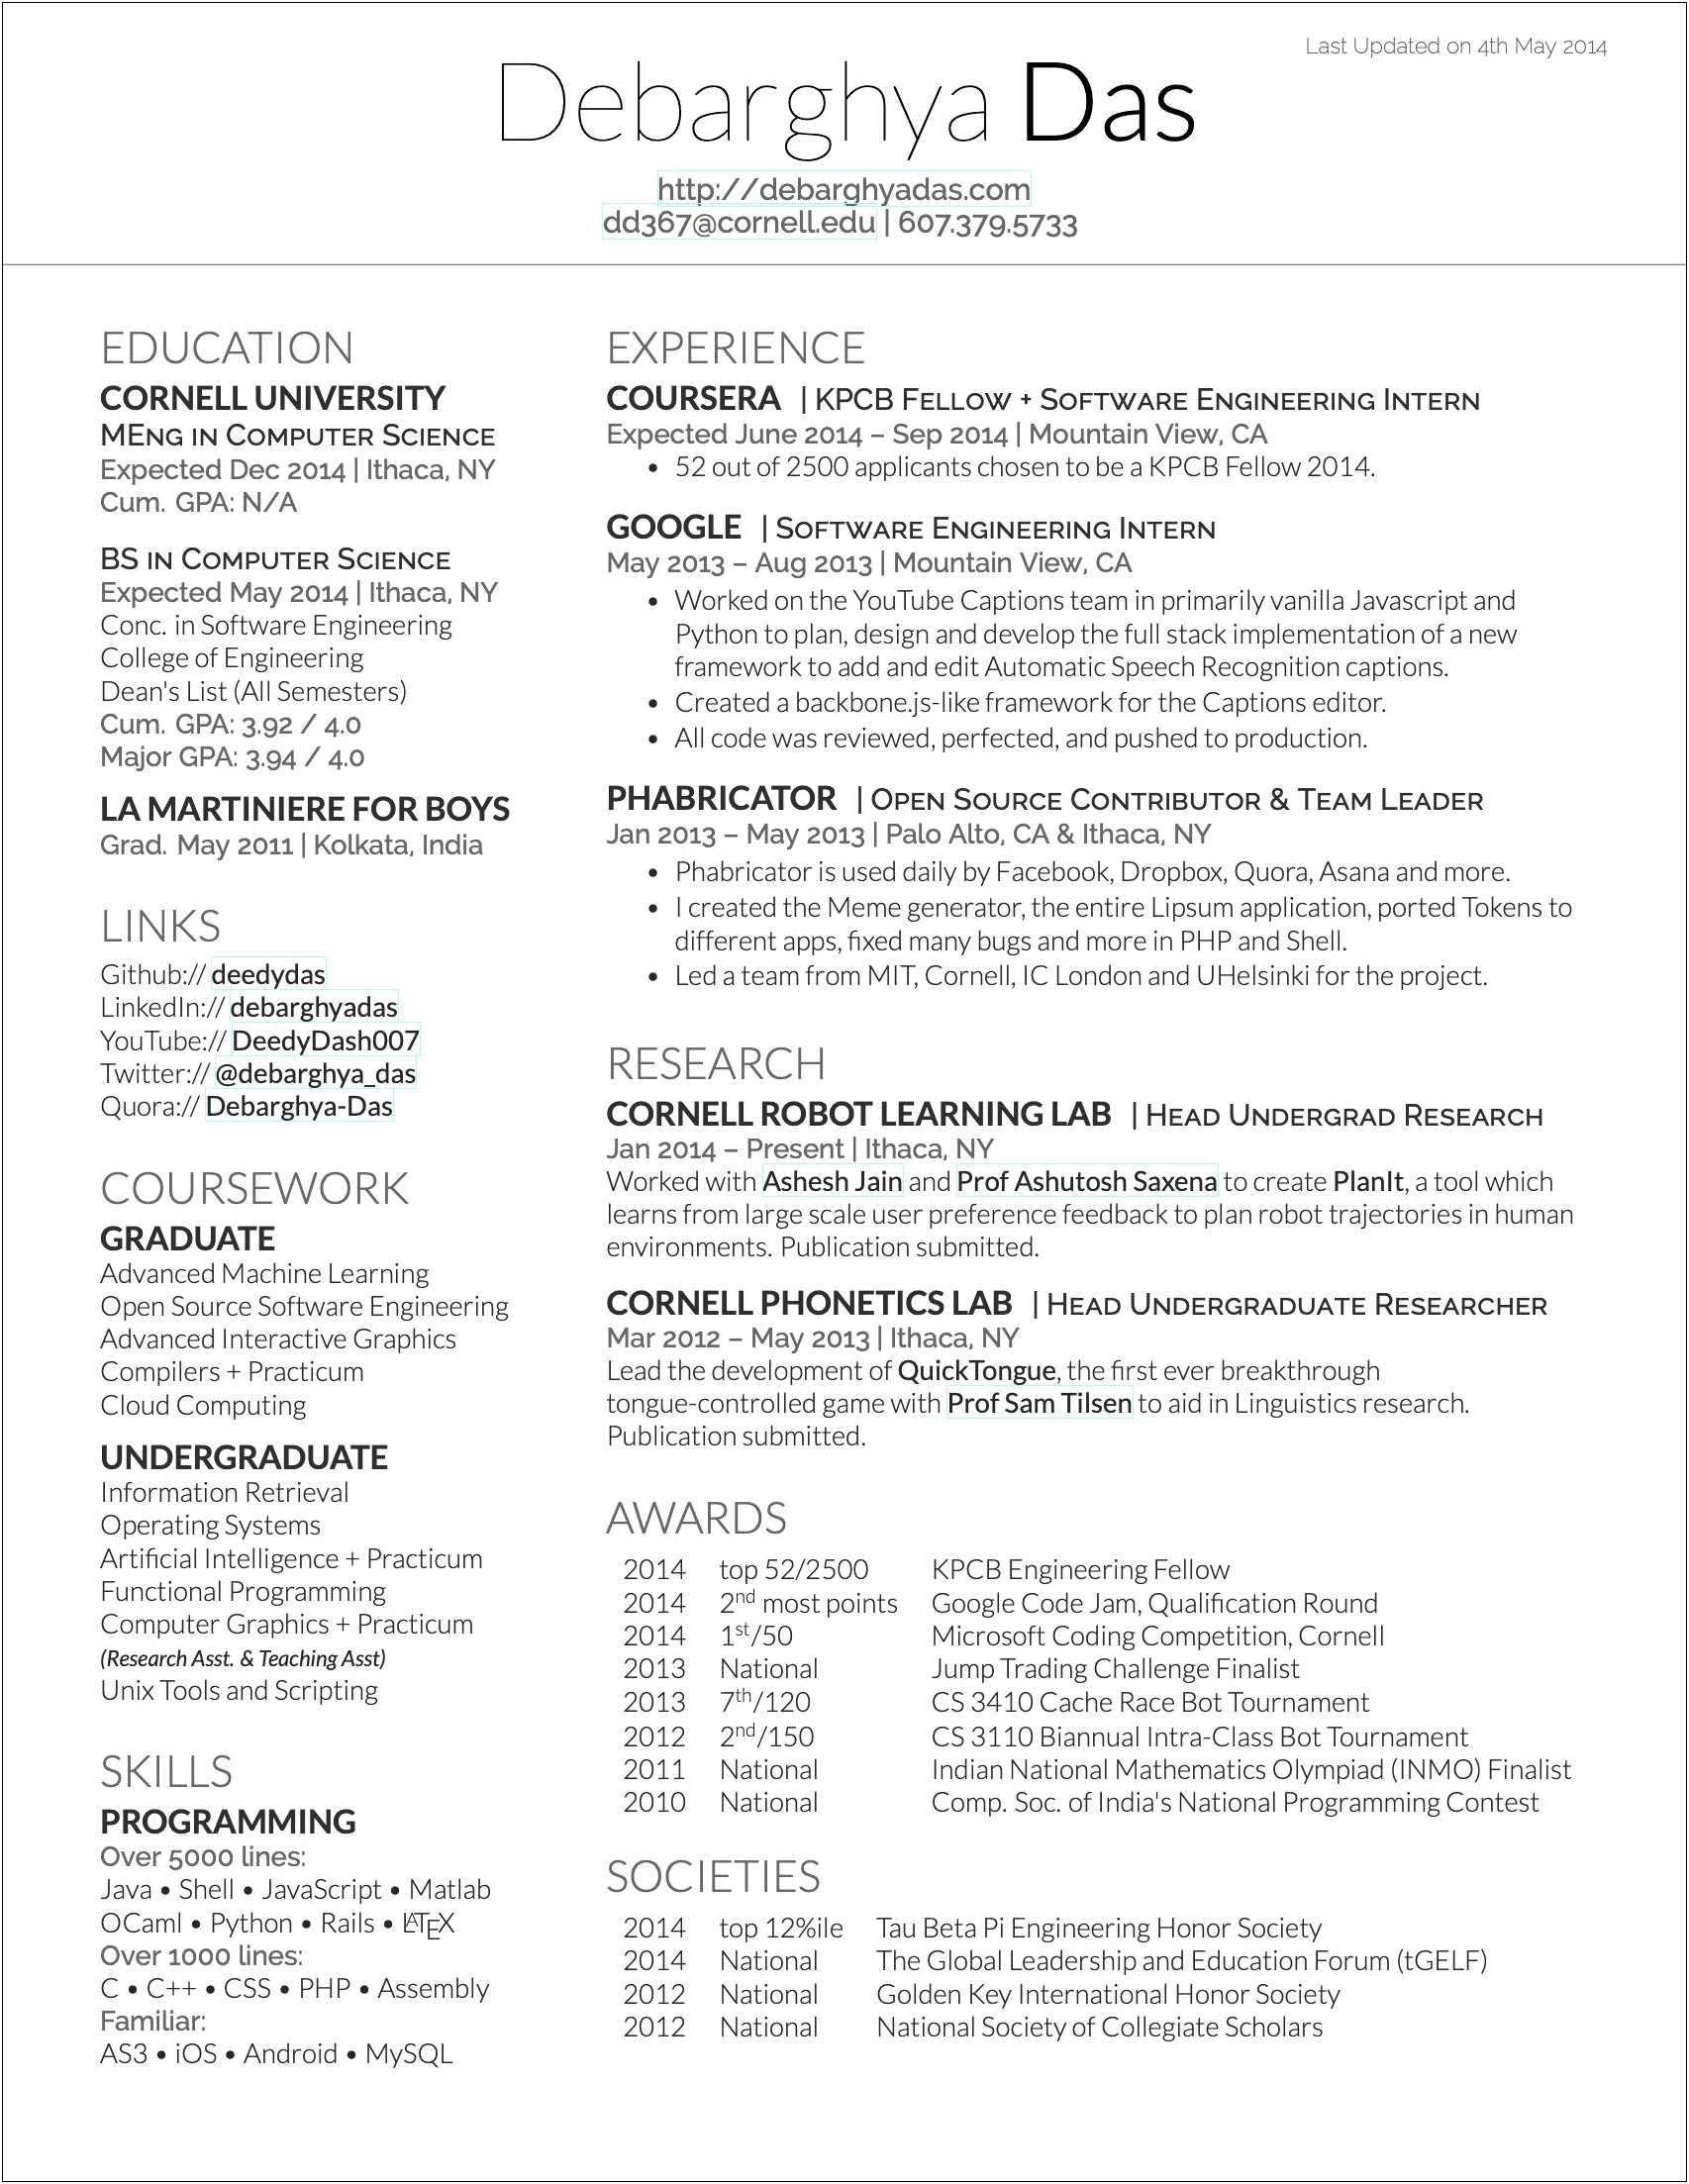 Qualification Samples For A Resume